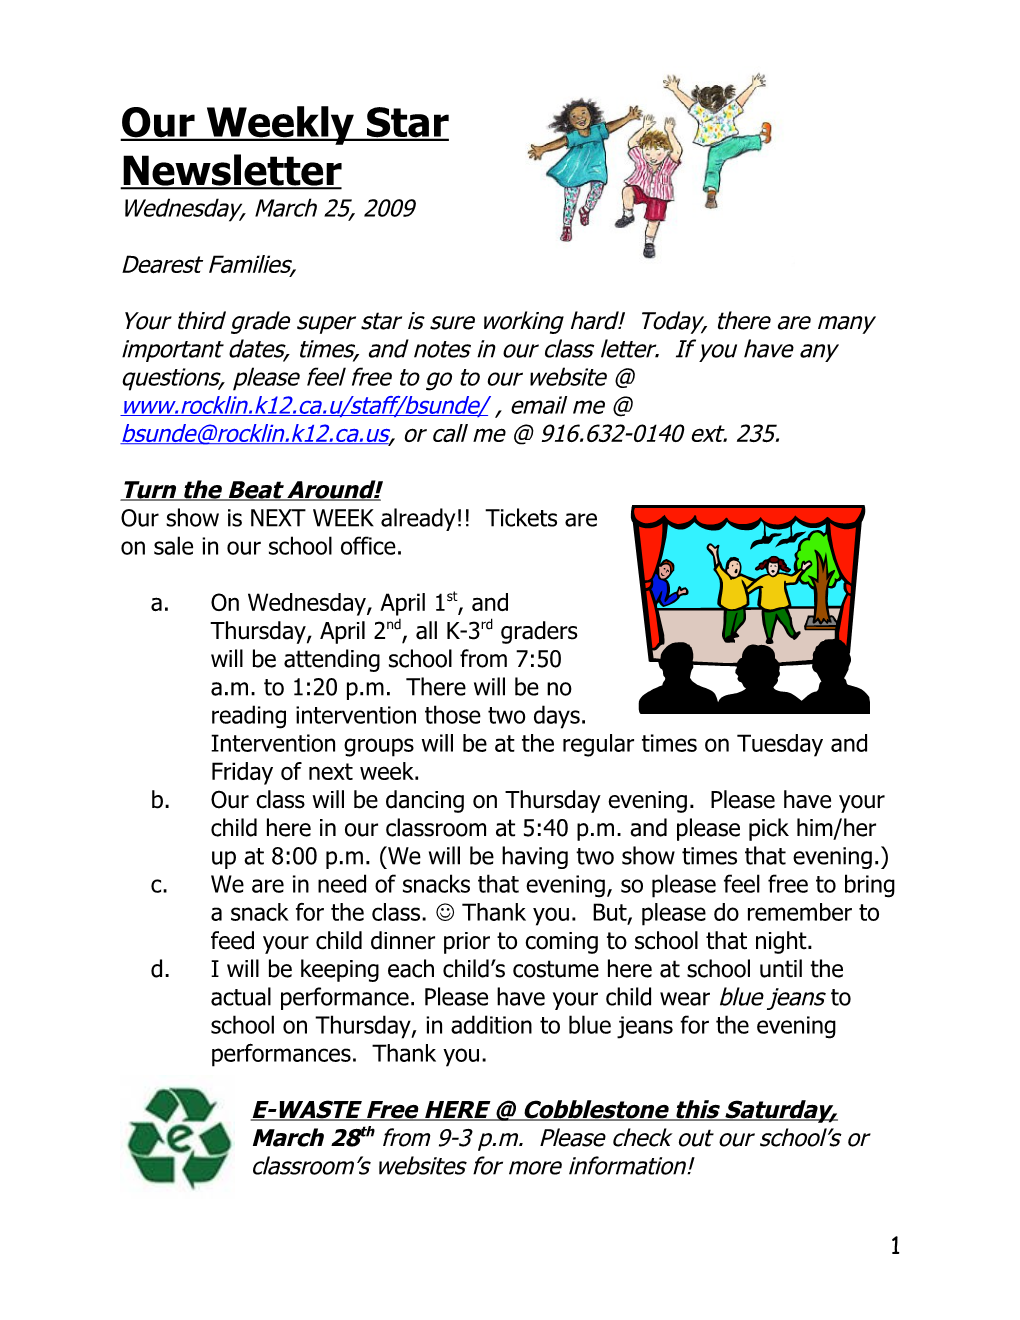 Our Weekly Star Newsletter